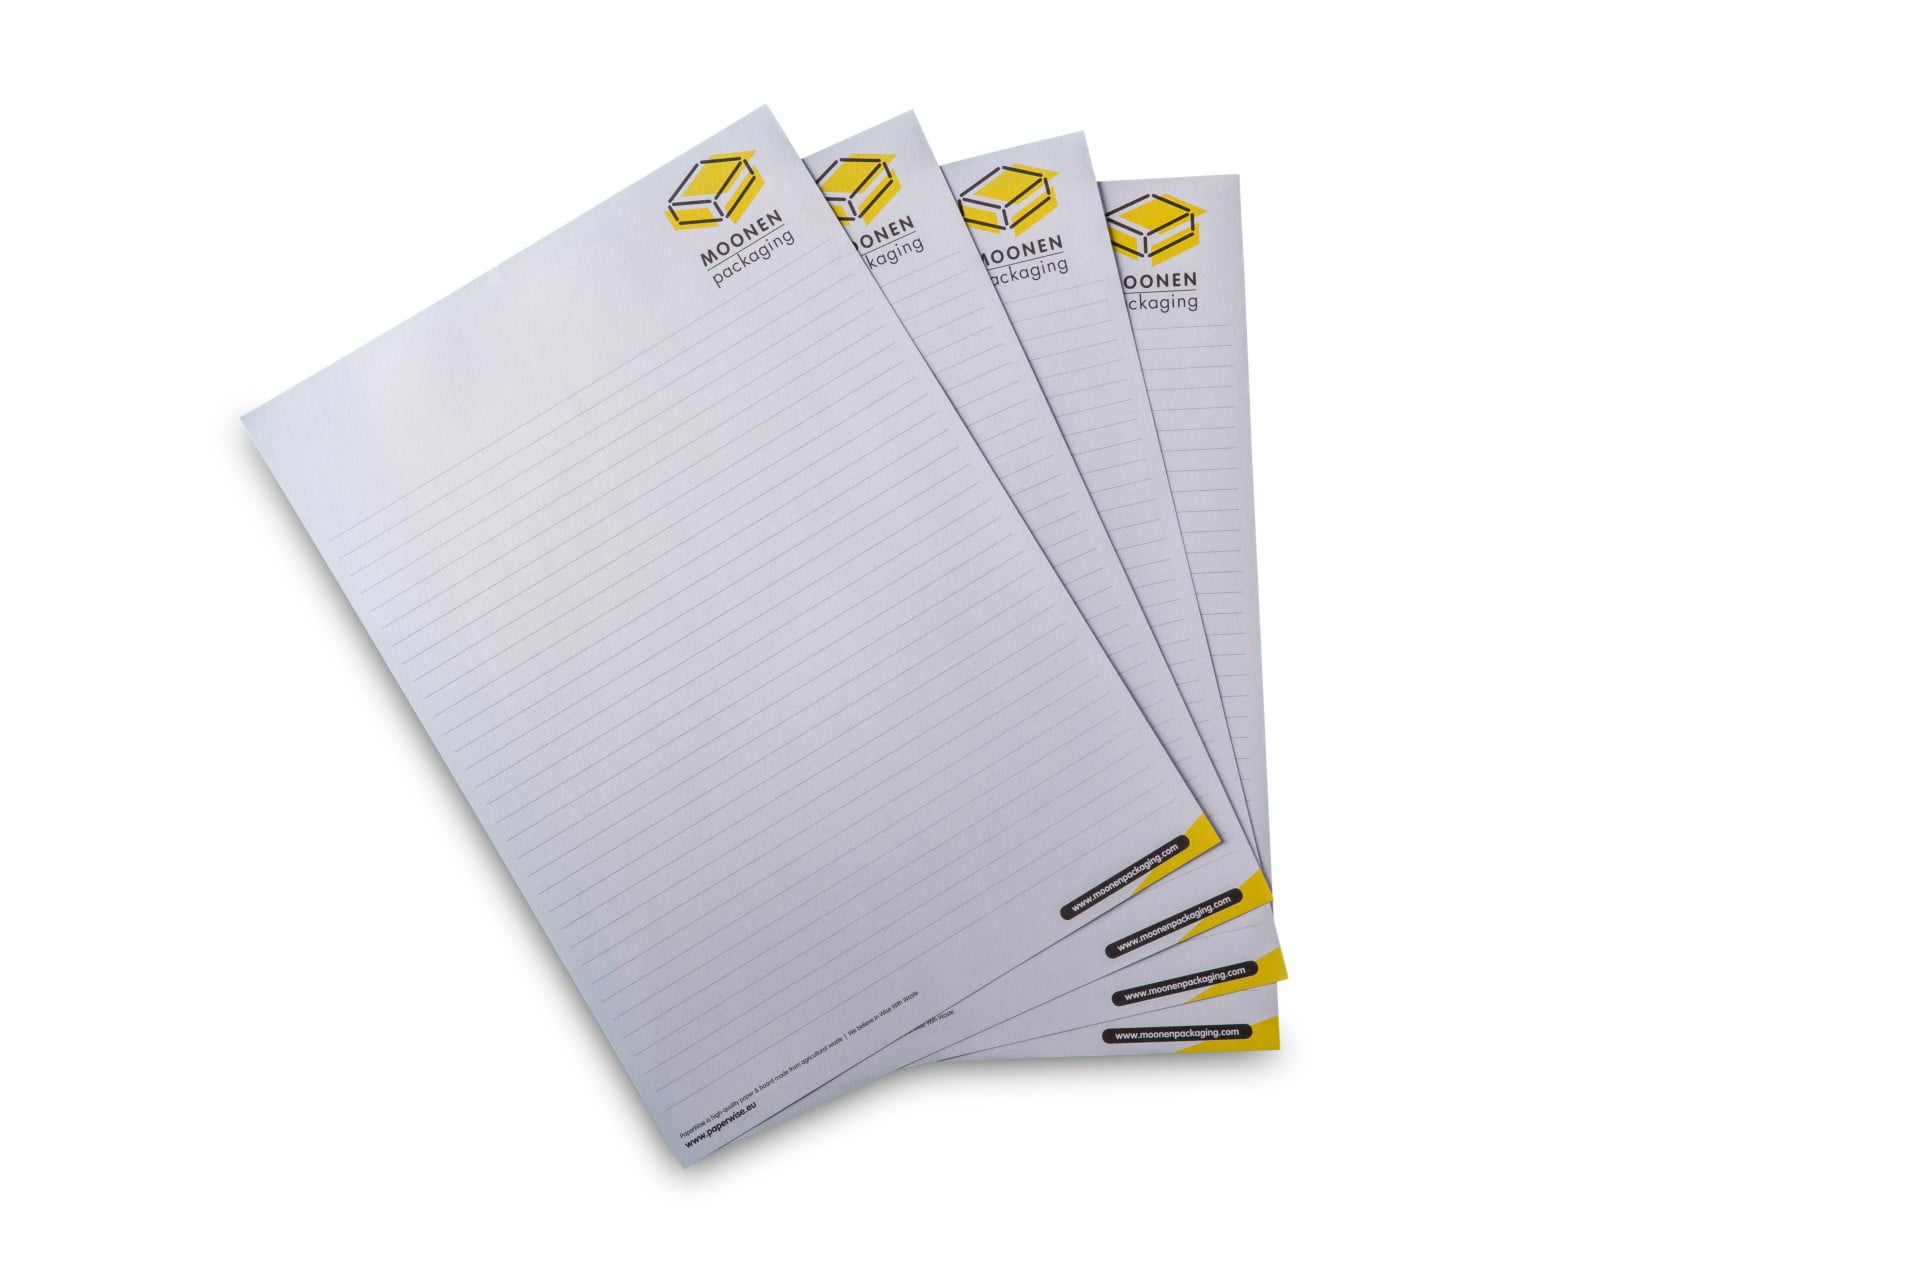 PaperWise sustainable paper notebooks notes white eco stationery organic writing pad office moonenpackaging